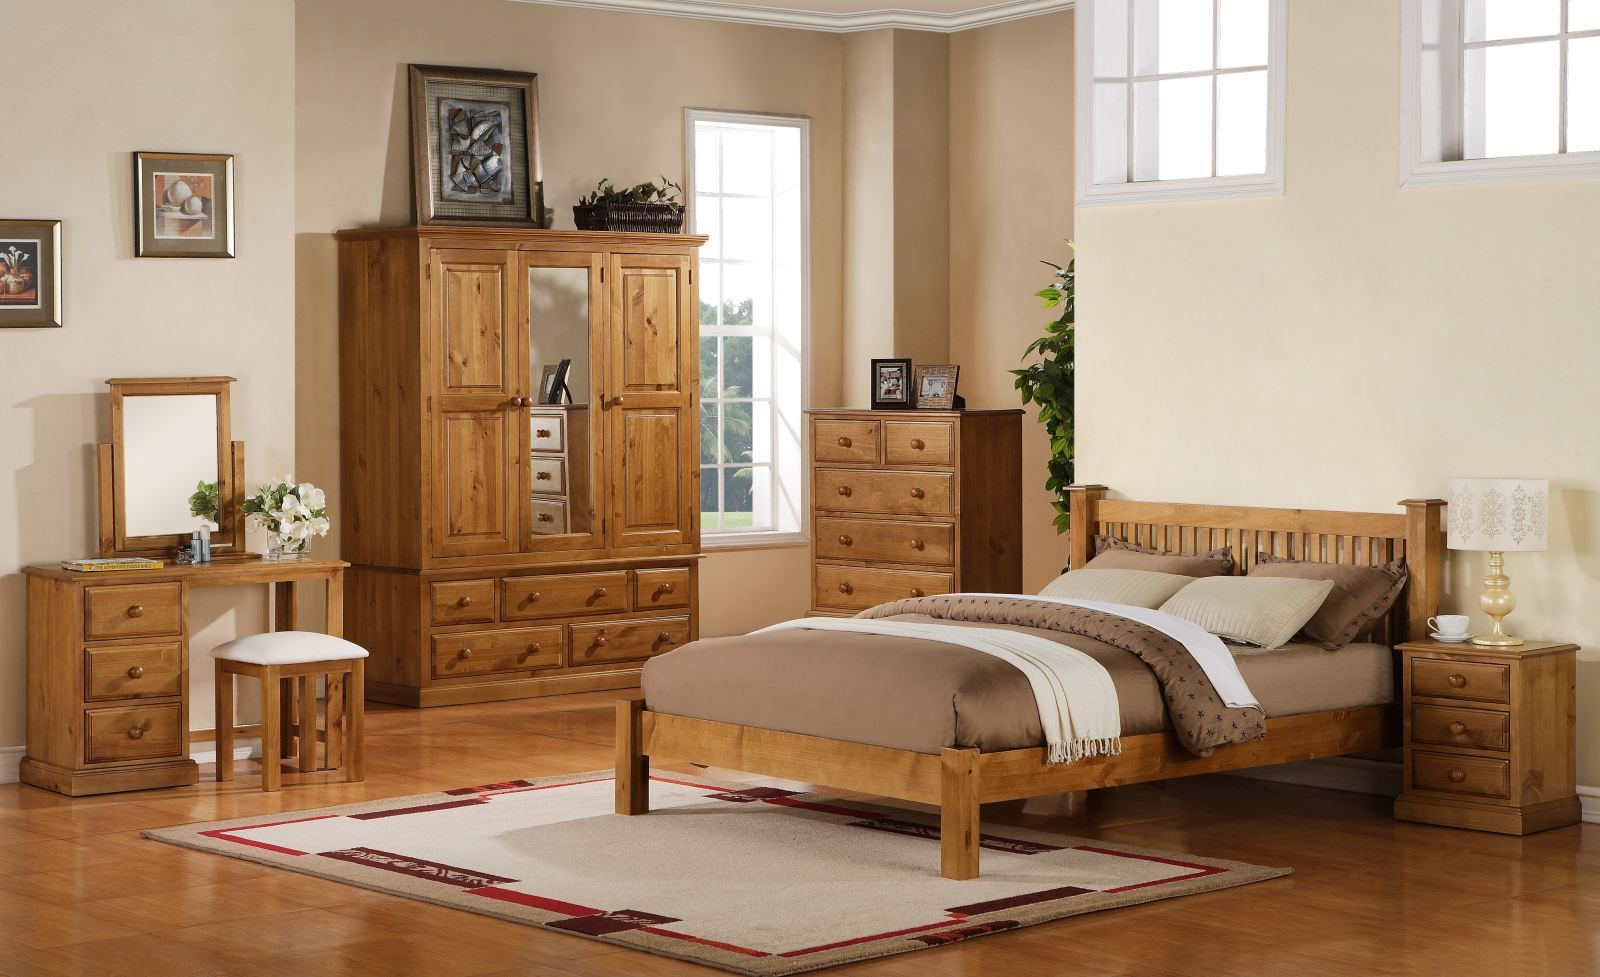 Awesome Trend Wood Bedroom Furniture 29 For Hme Designing throughout dimensions 1600 X 977